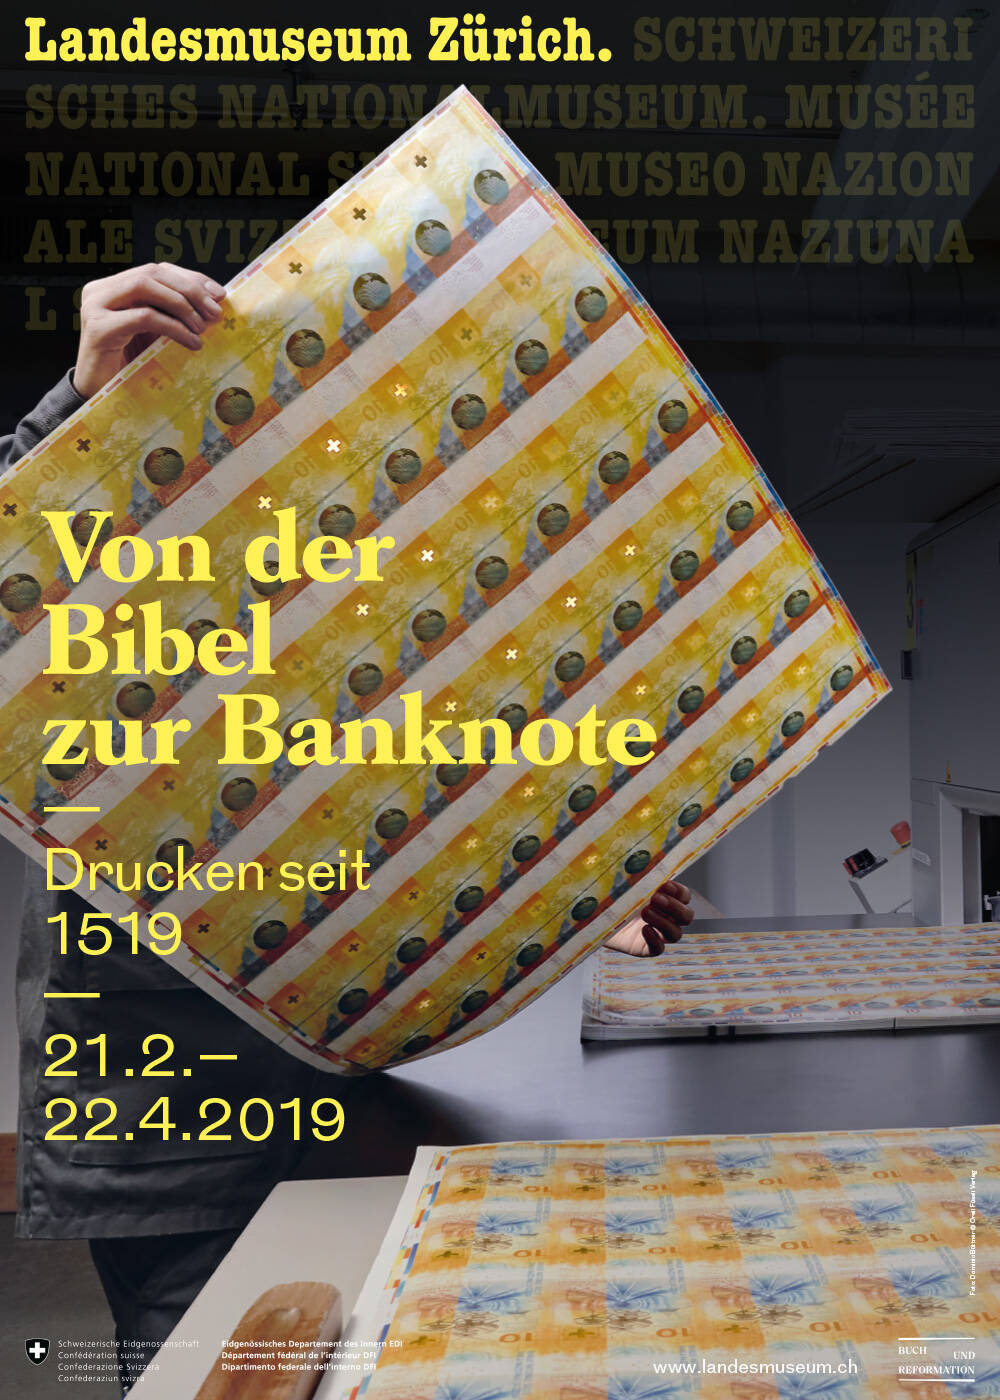 Poster of the "From the Bible to the Banknote" exhibition